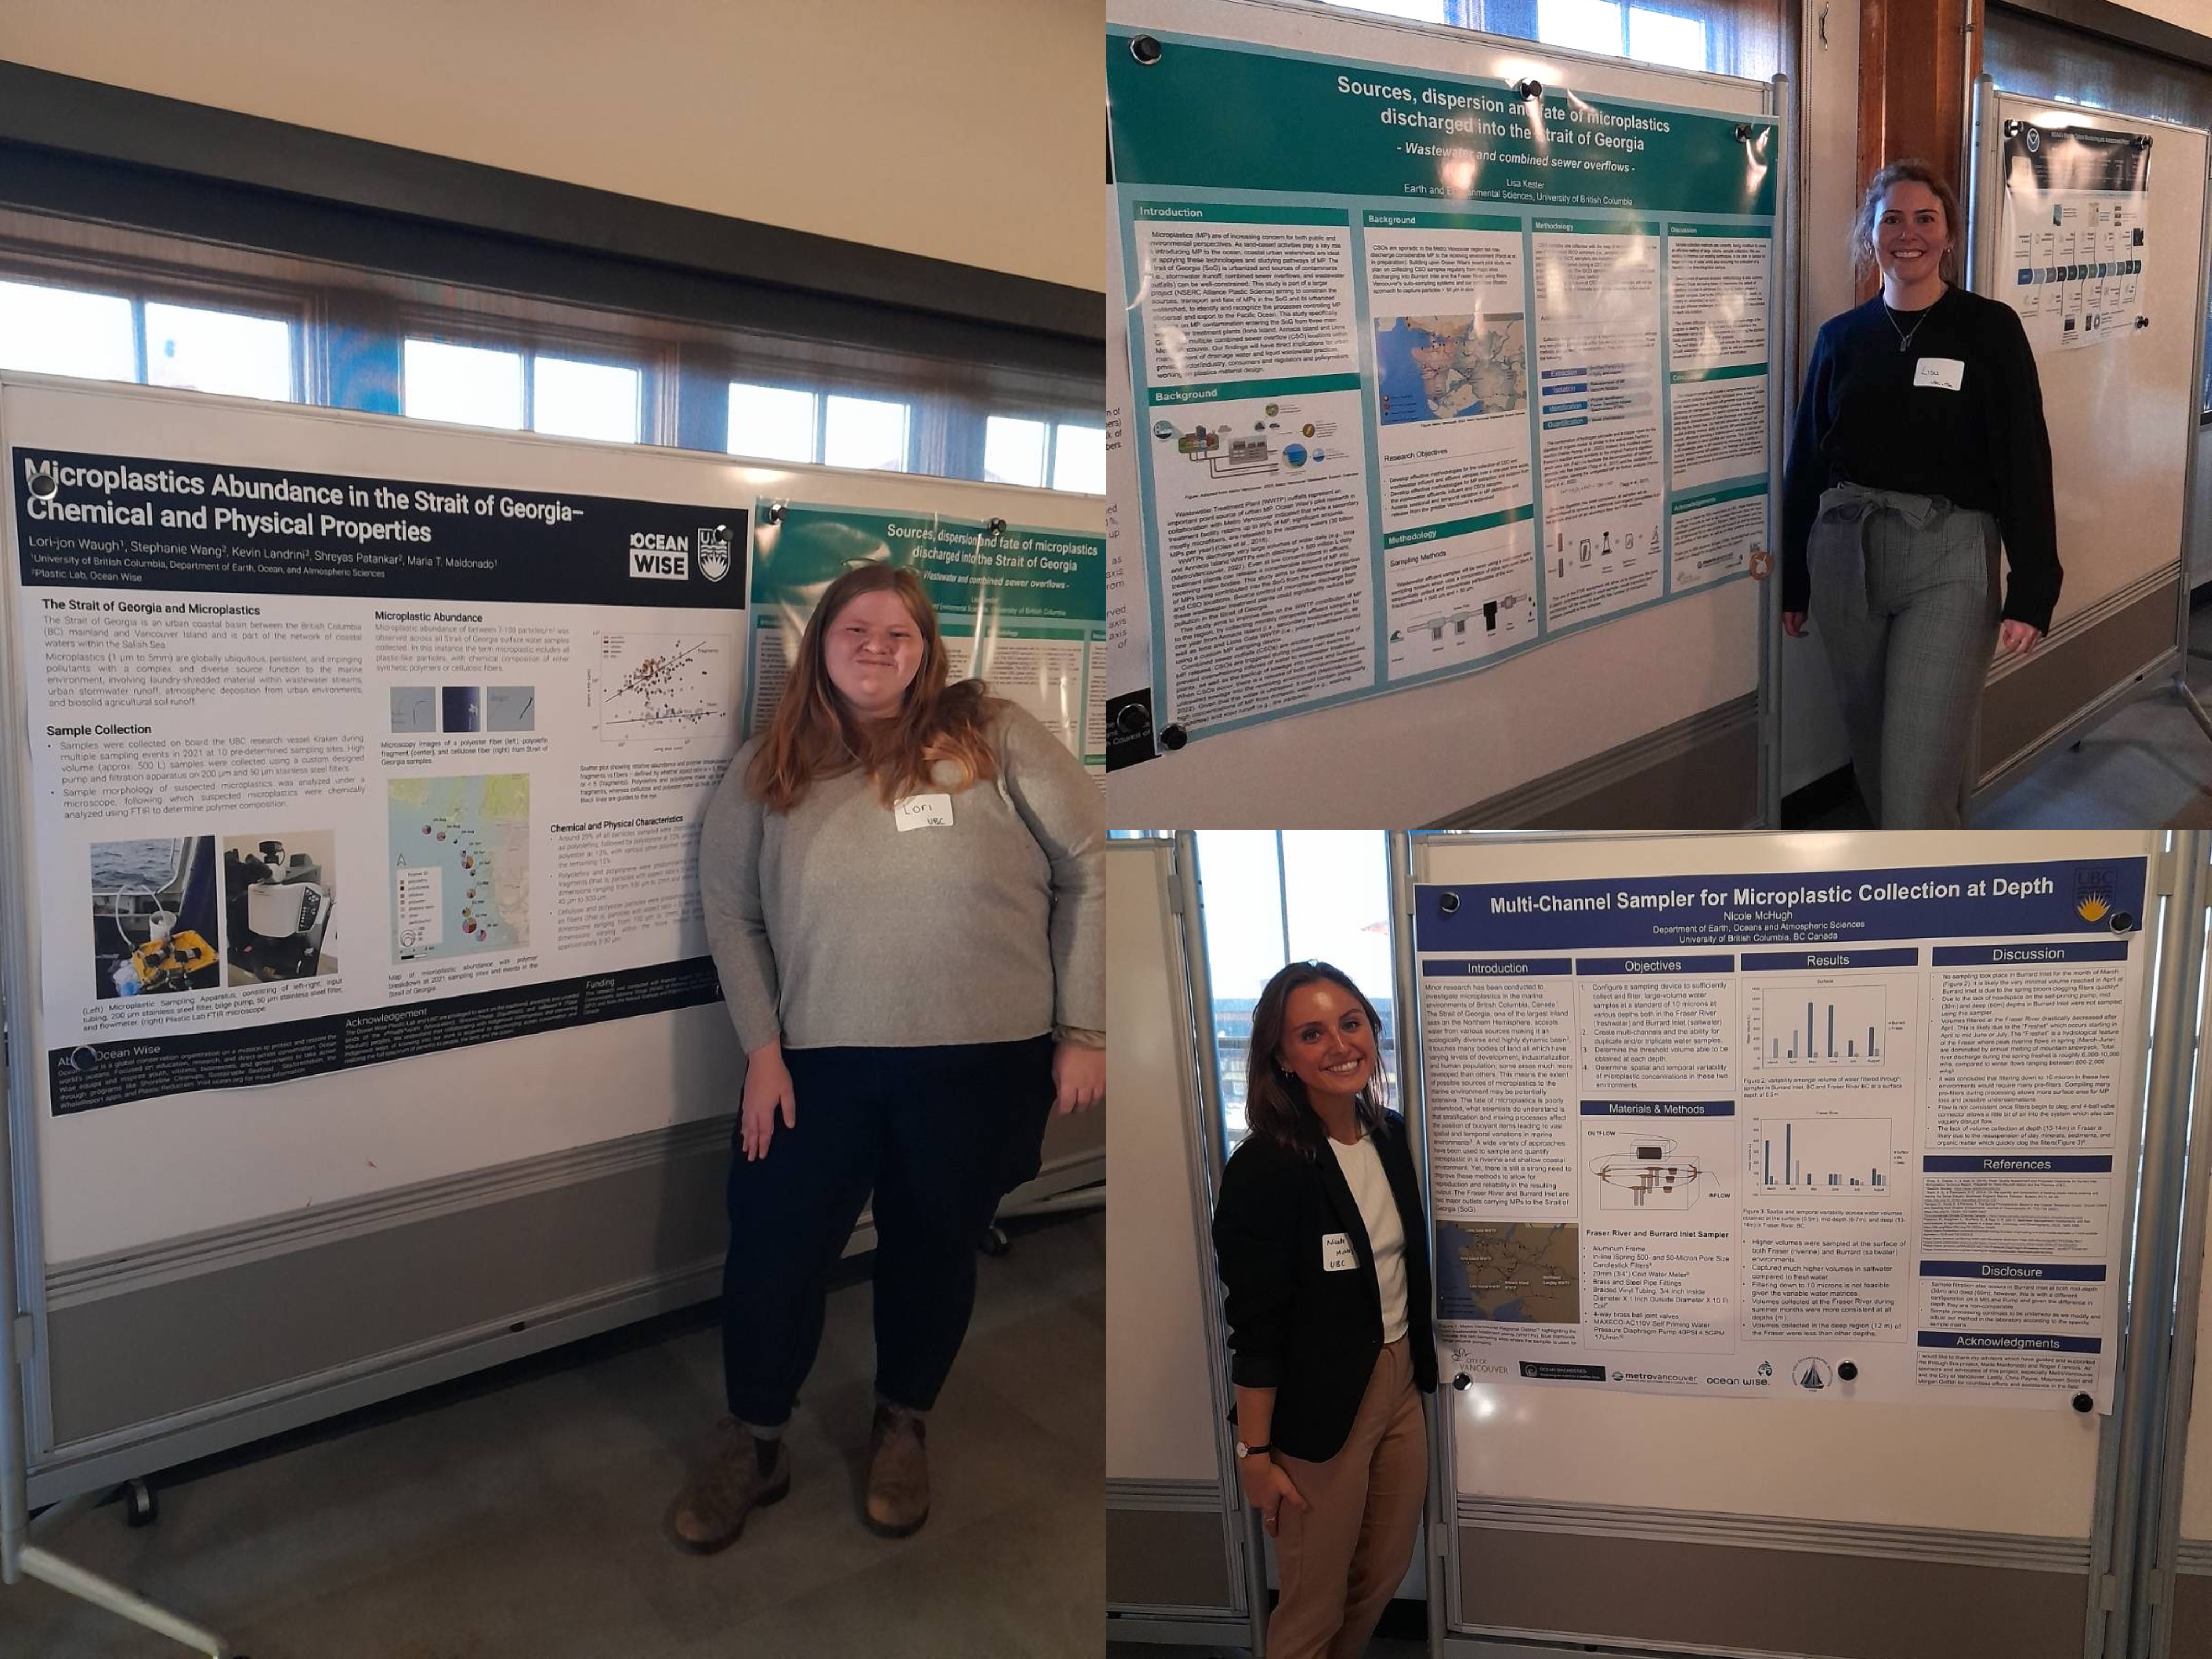 Lori, Lisa and Nicole presenting their research at the poster session.